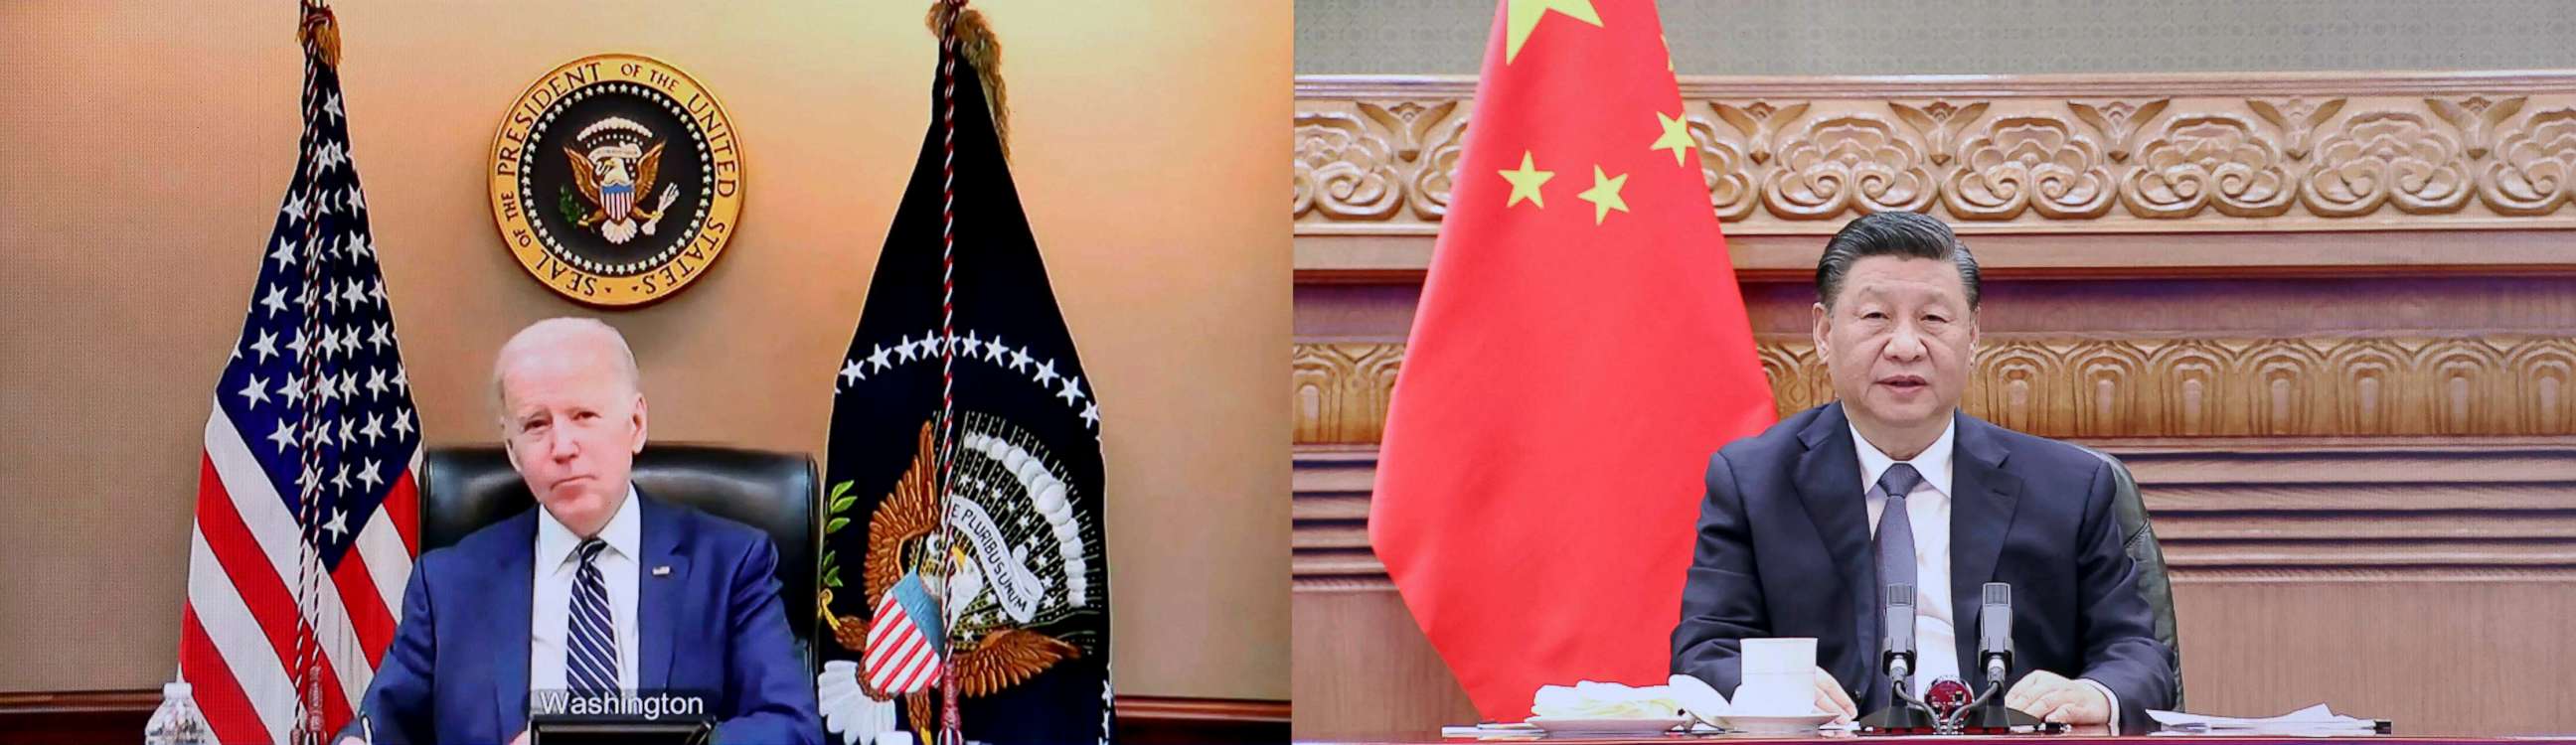 PHOTO: President Joe Biden participated in a video call with Chinese President Xi Jinping, March 18, 2022.